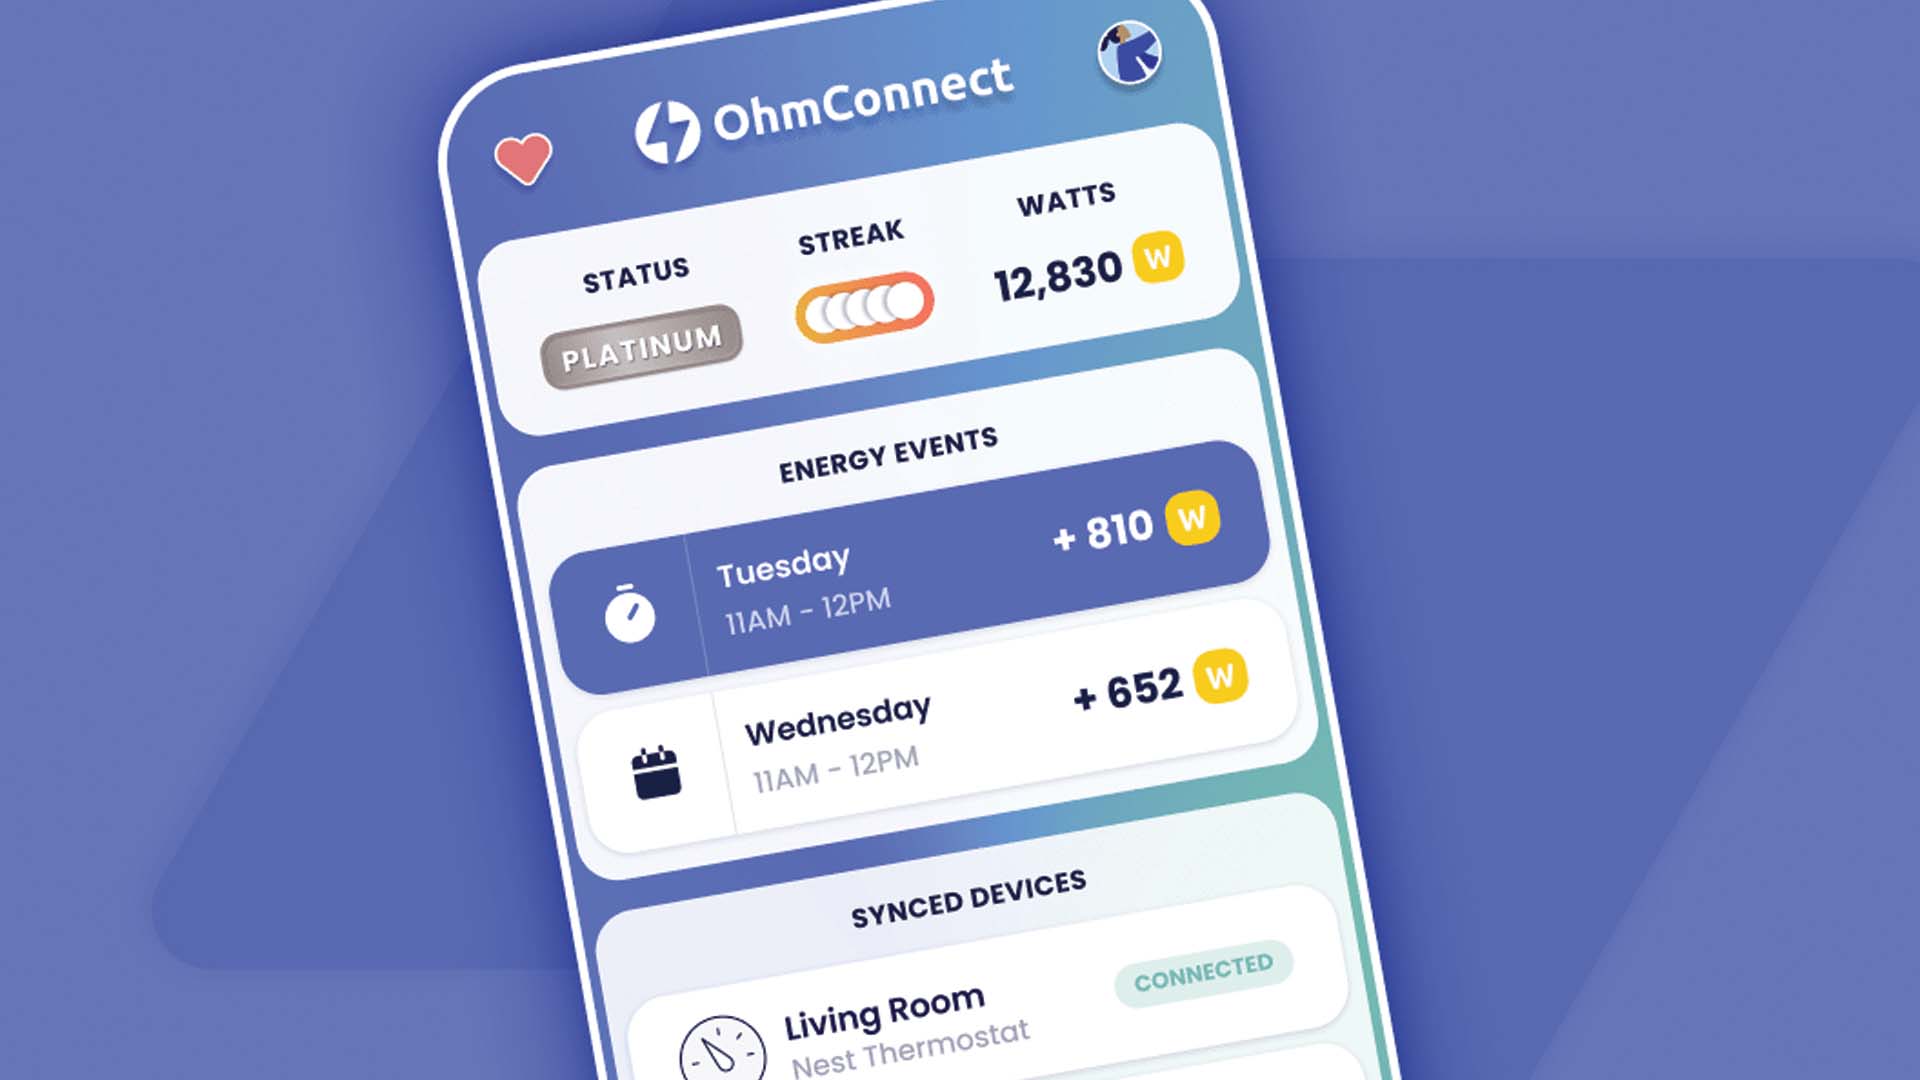 OhmConnect App visuals from an innovative tech startup